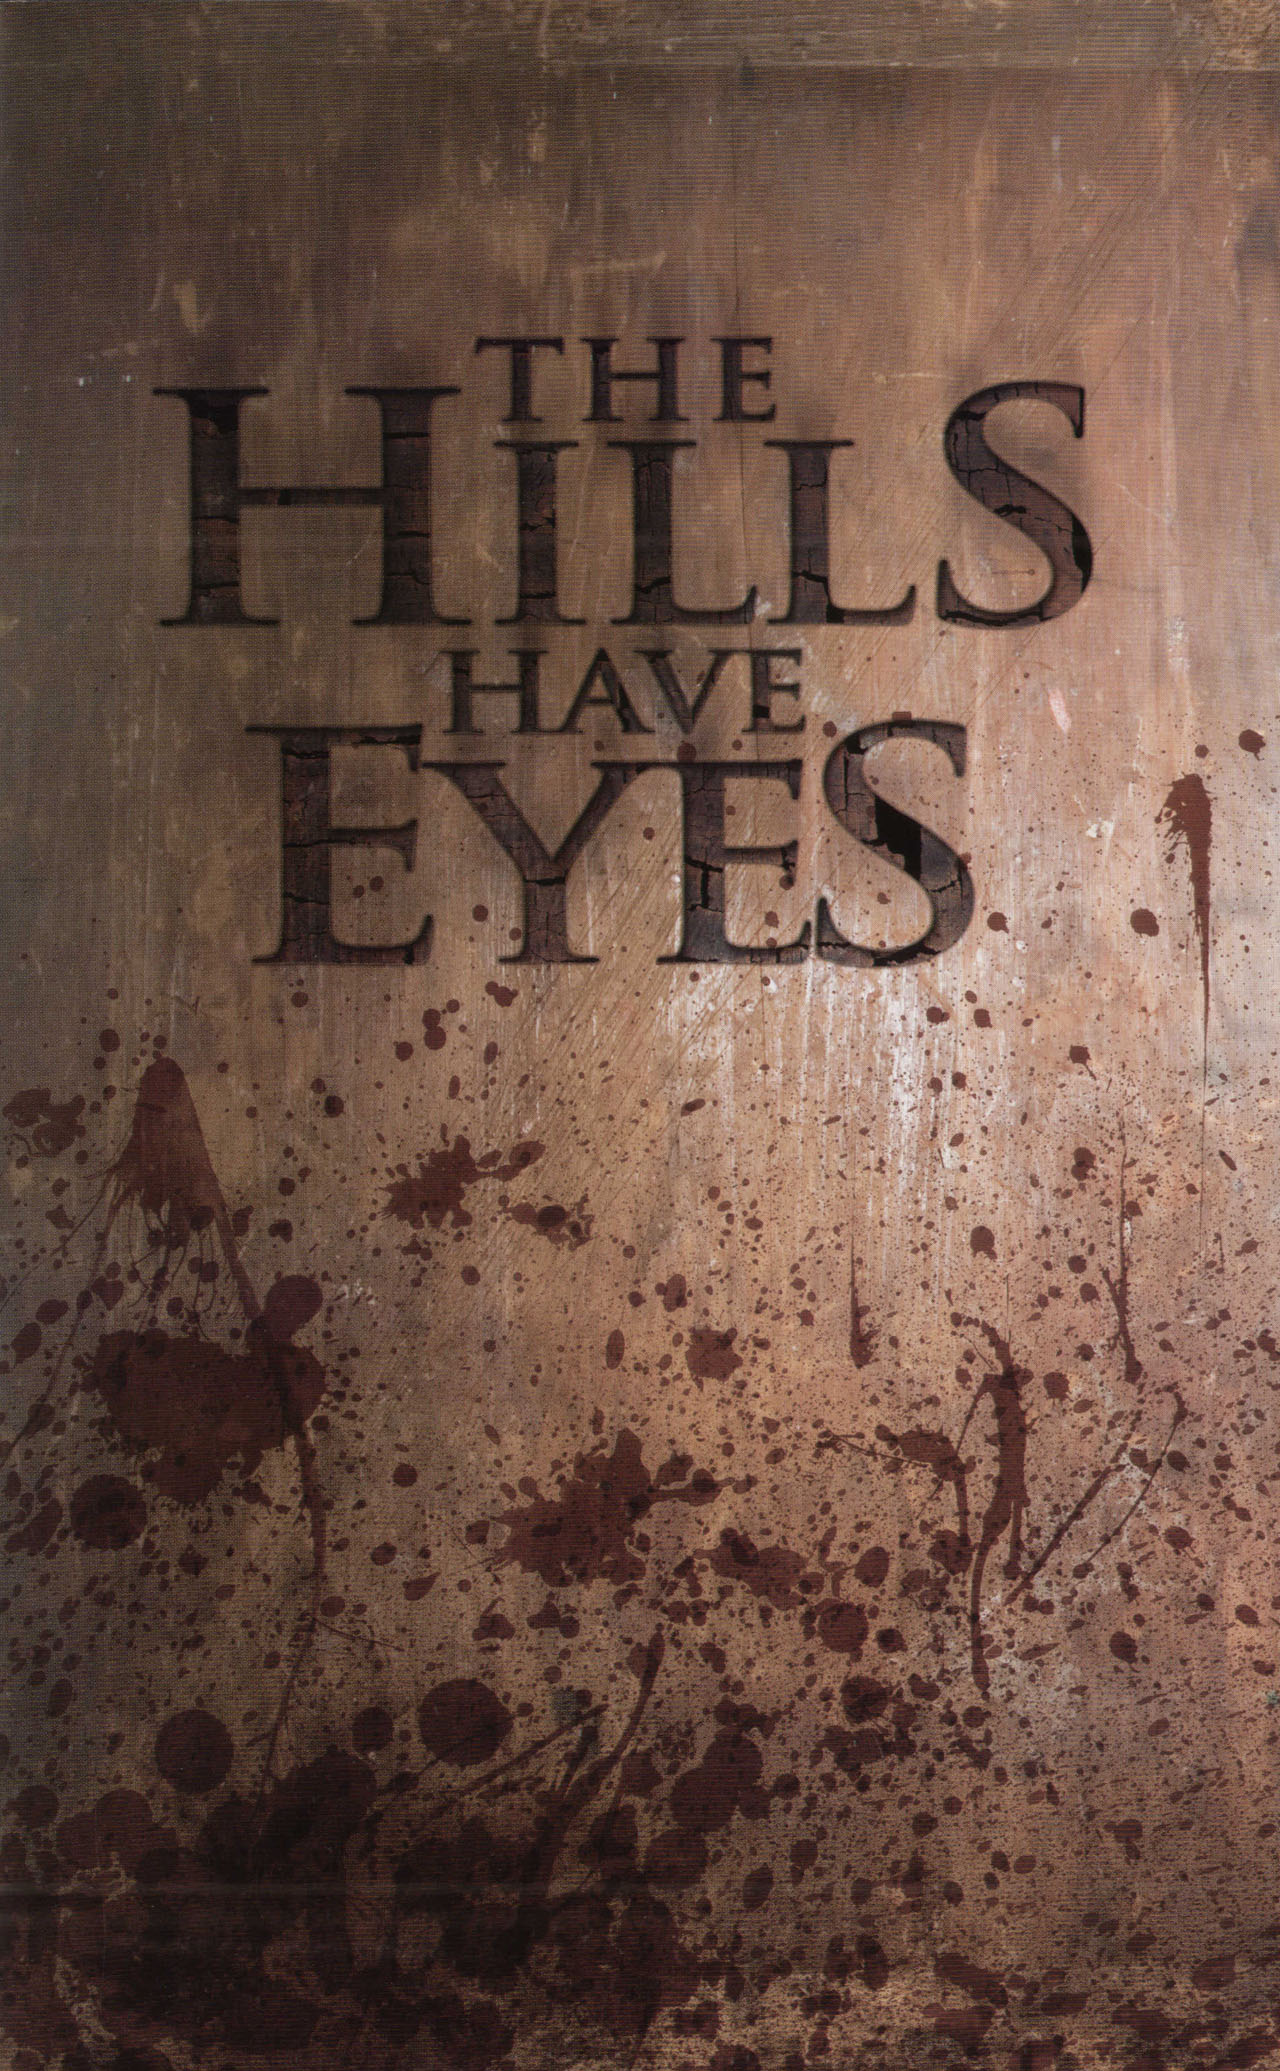 Read online The Hills Have Eyes: The Beginning comic -  Issue # TPB - 2